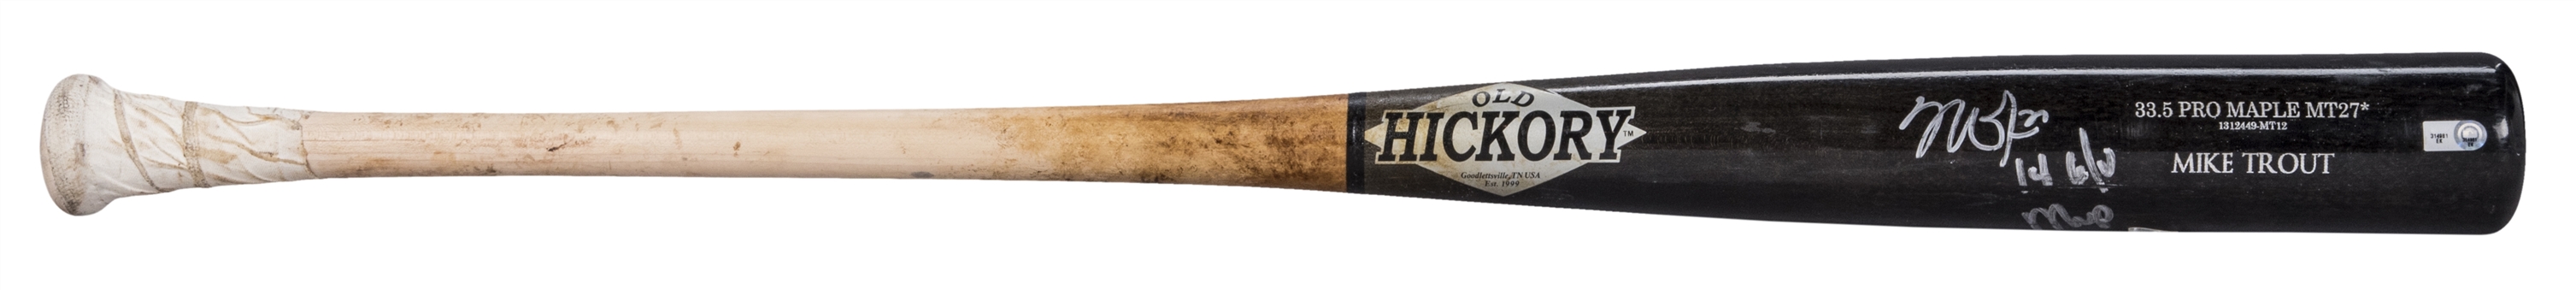 2014 MVP Season Mike Trout Game Used and Signed Old Hickory MT27* Bat Used on 05/02/2014 (PSA/DNA GU 9, MLB Authenticated & Trout LOA)